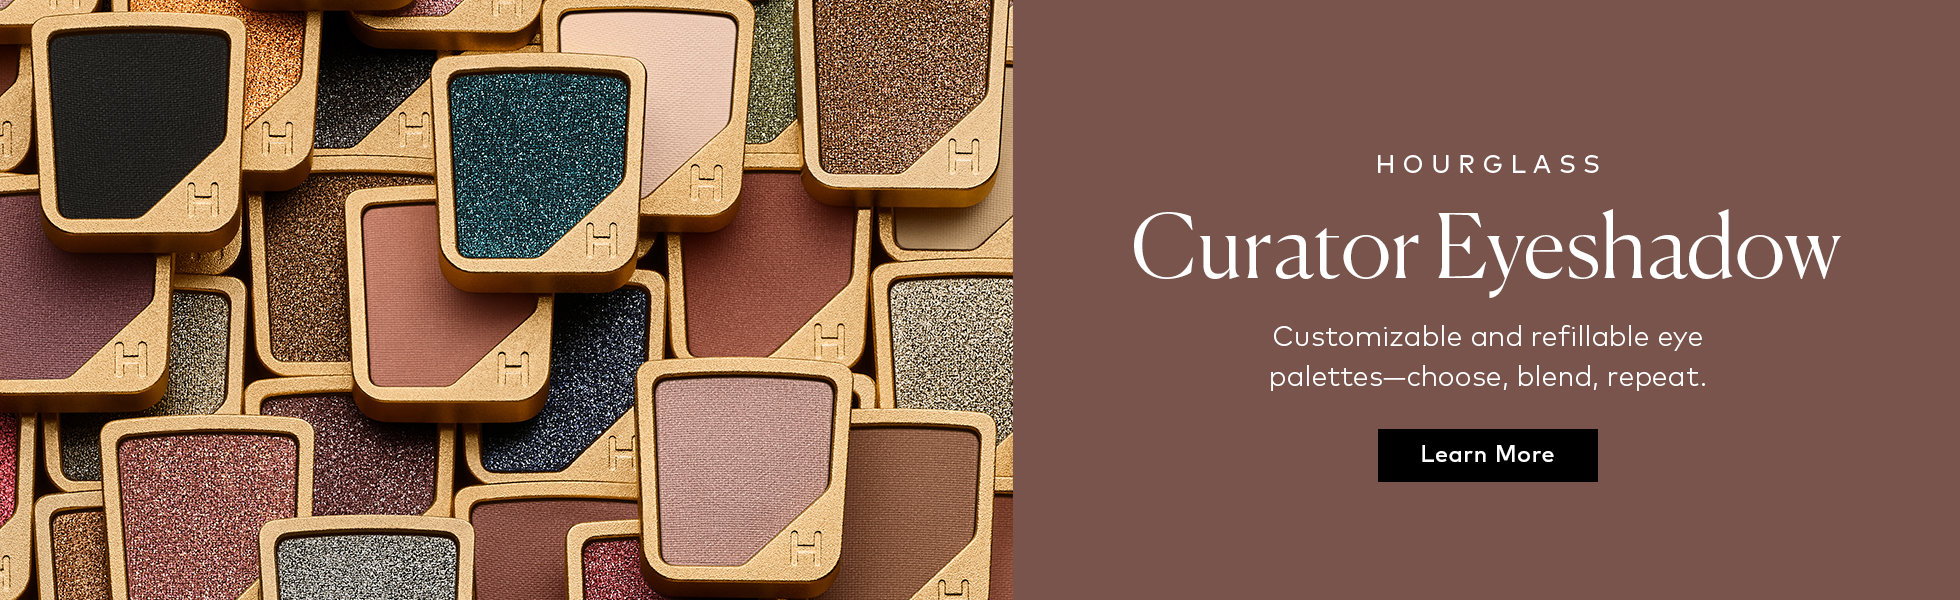 Build your own palette with Hourglass Curator Eyeeshadows